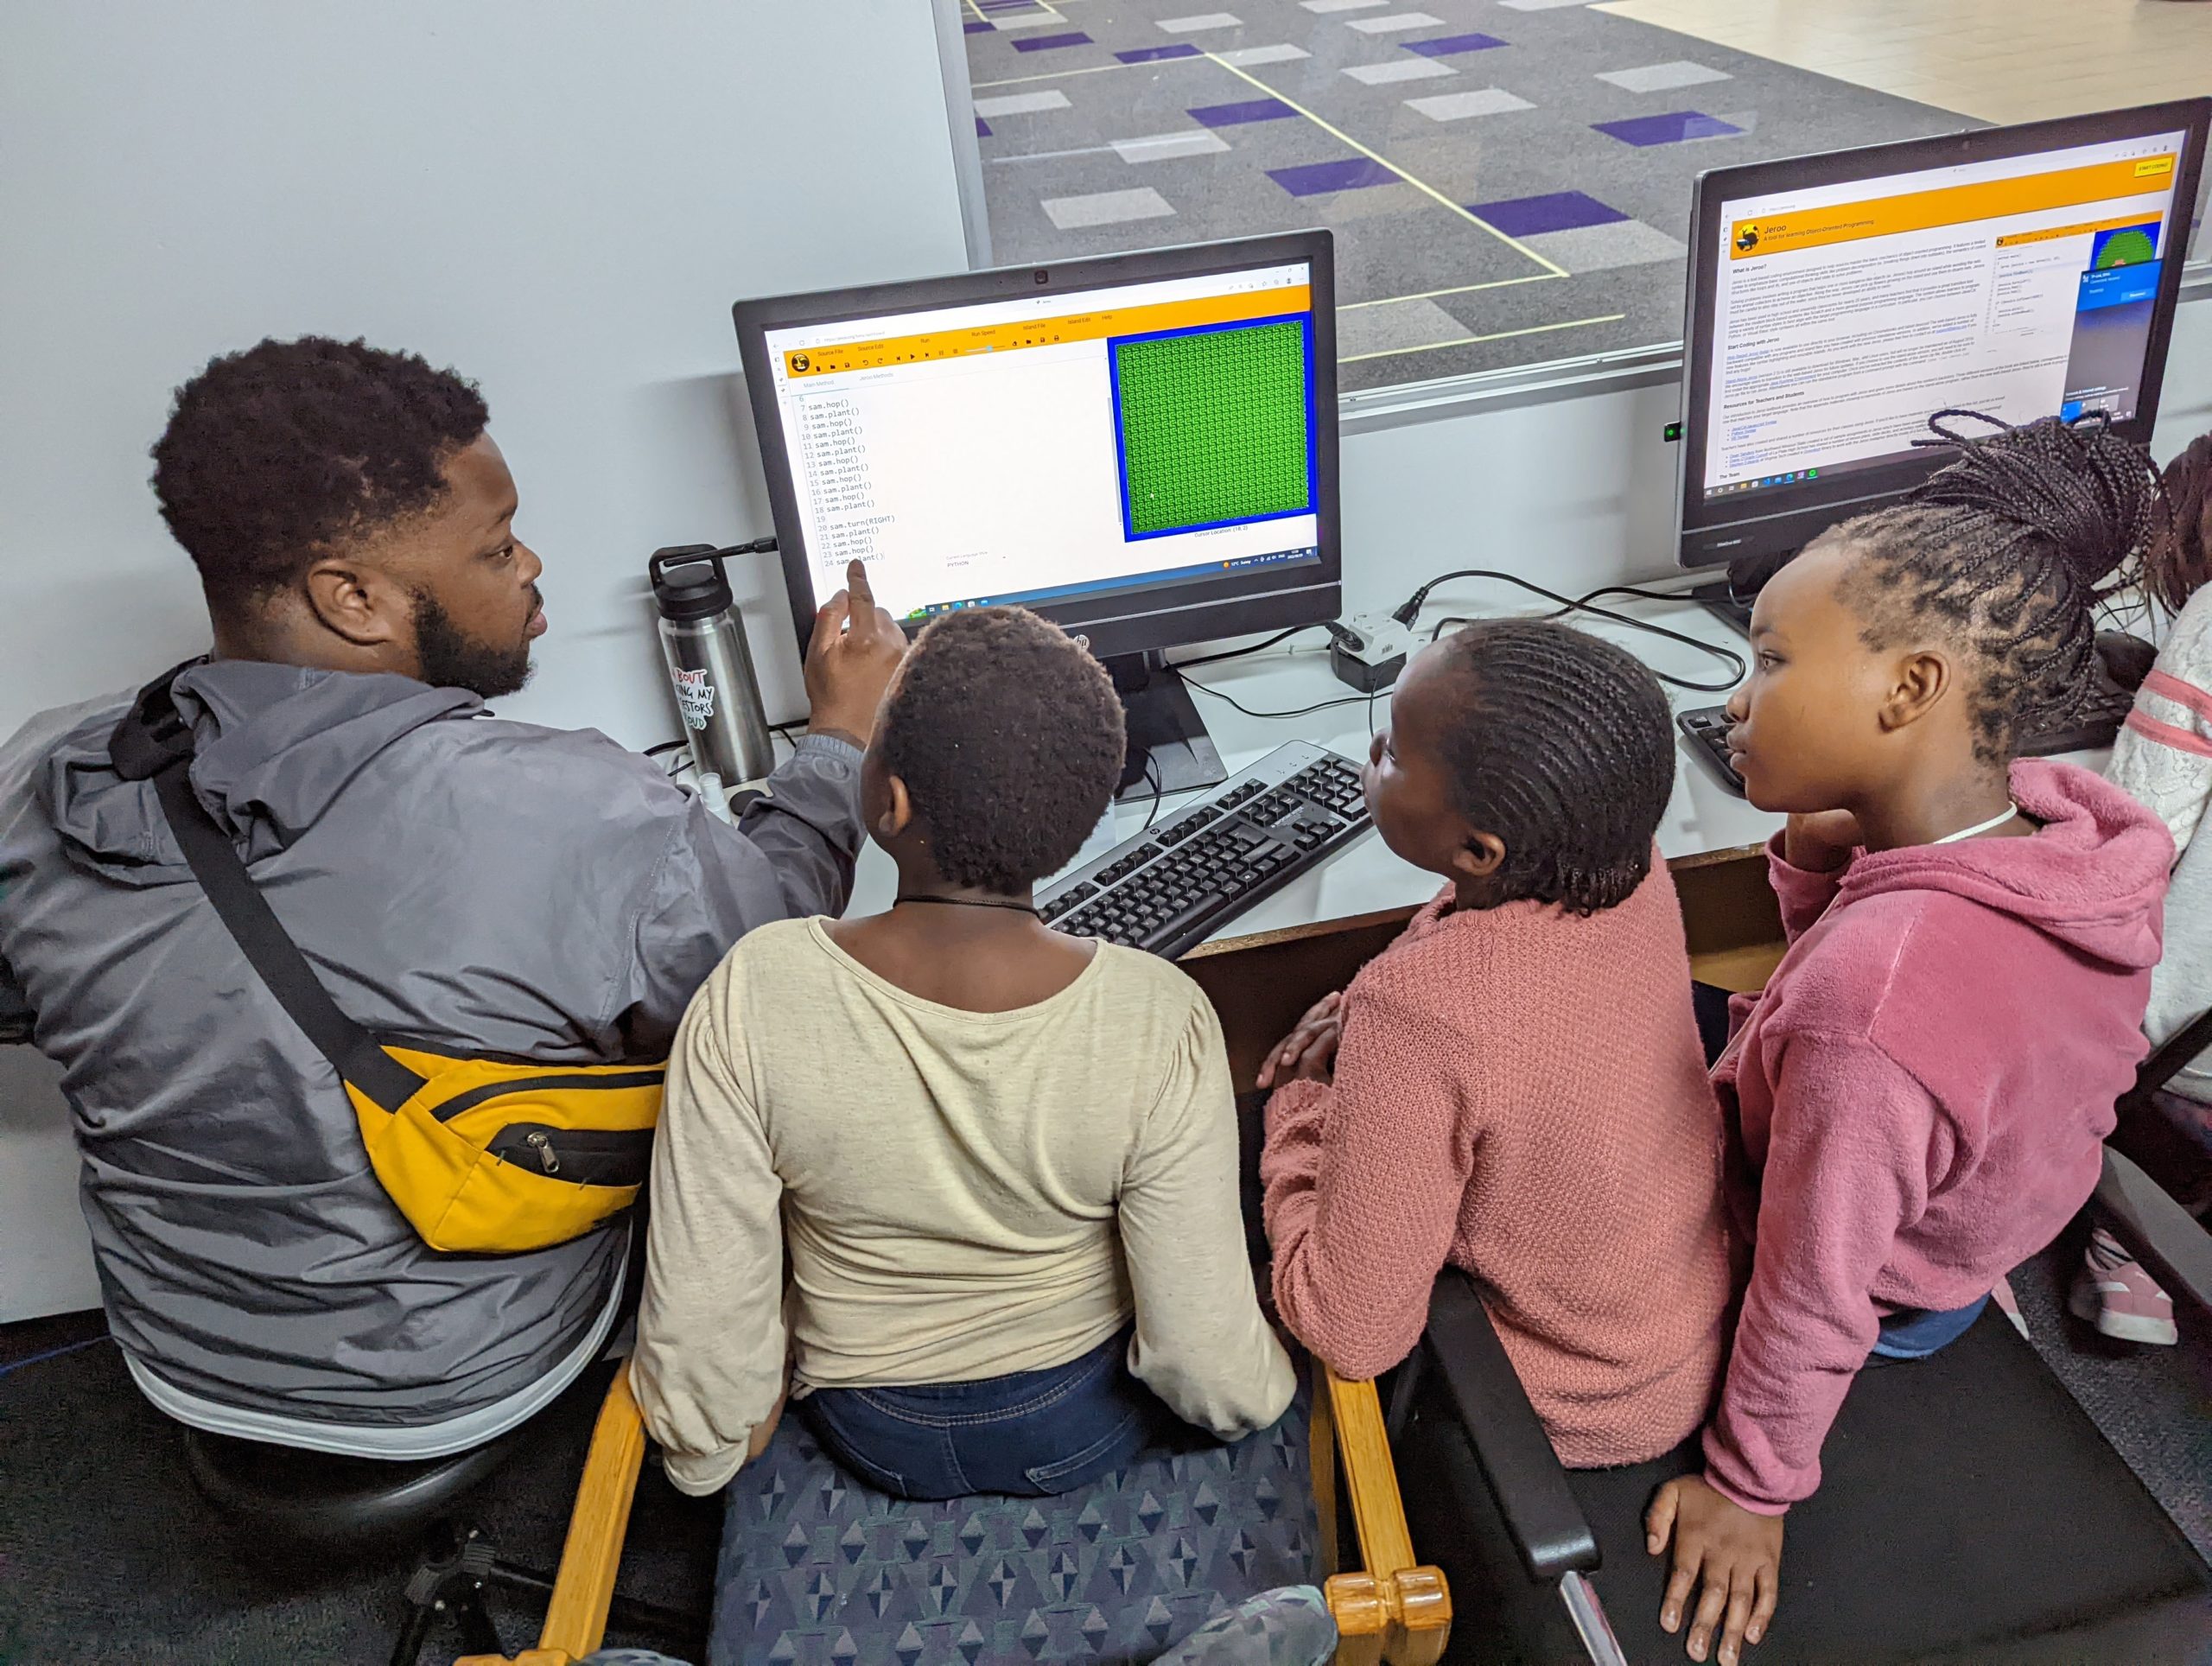 A Mercer student teaches Cape Town children a computer science lesson.